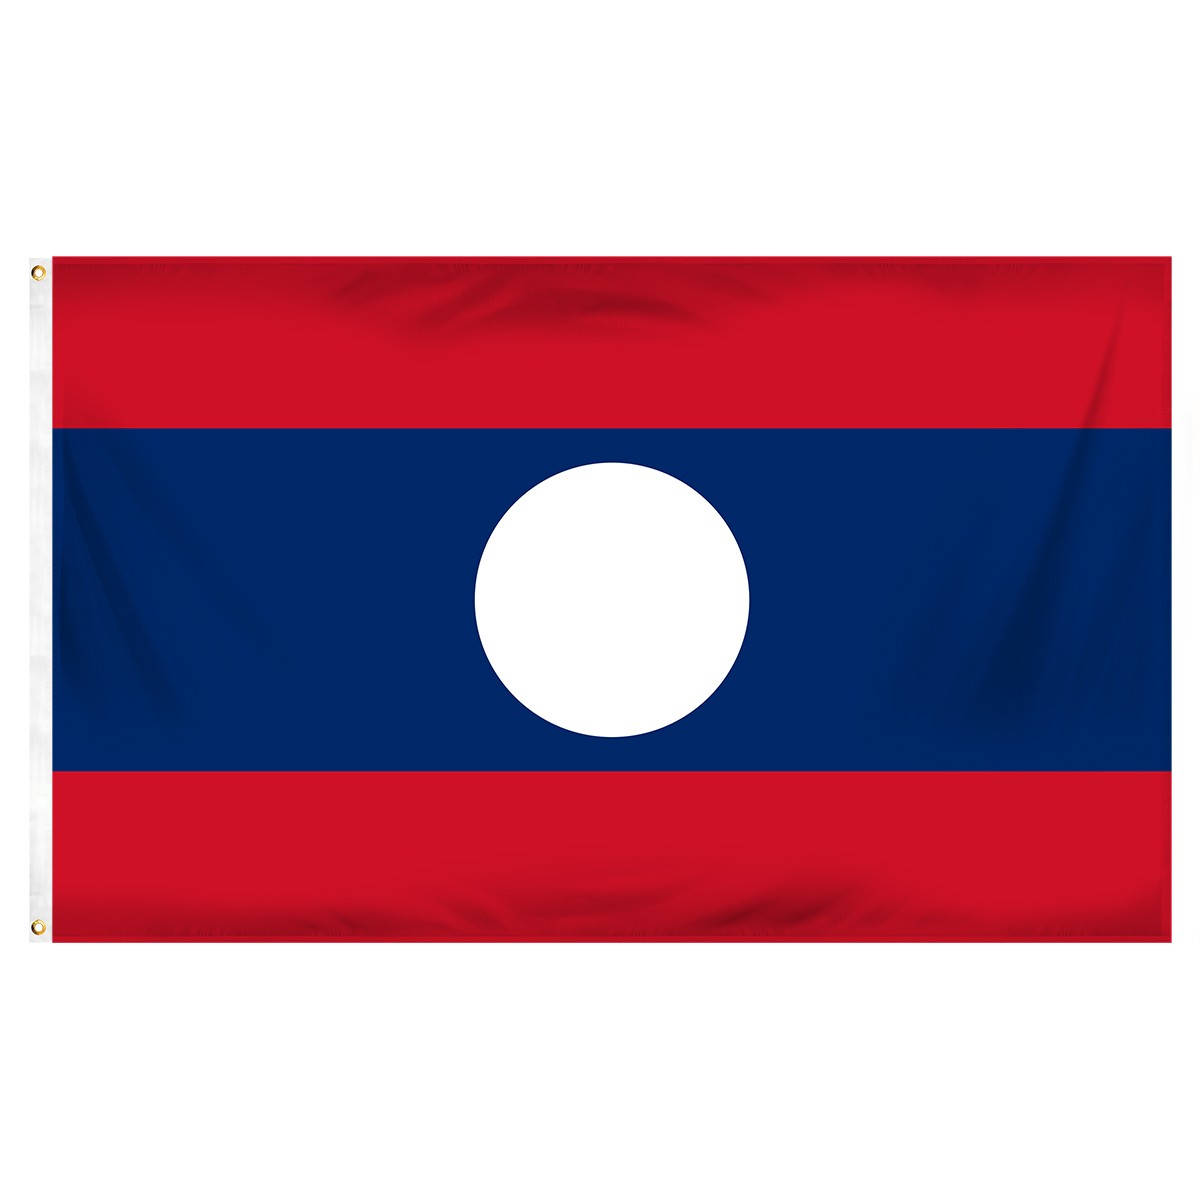 Laos Posters and Banners